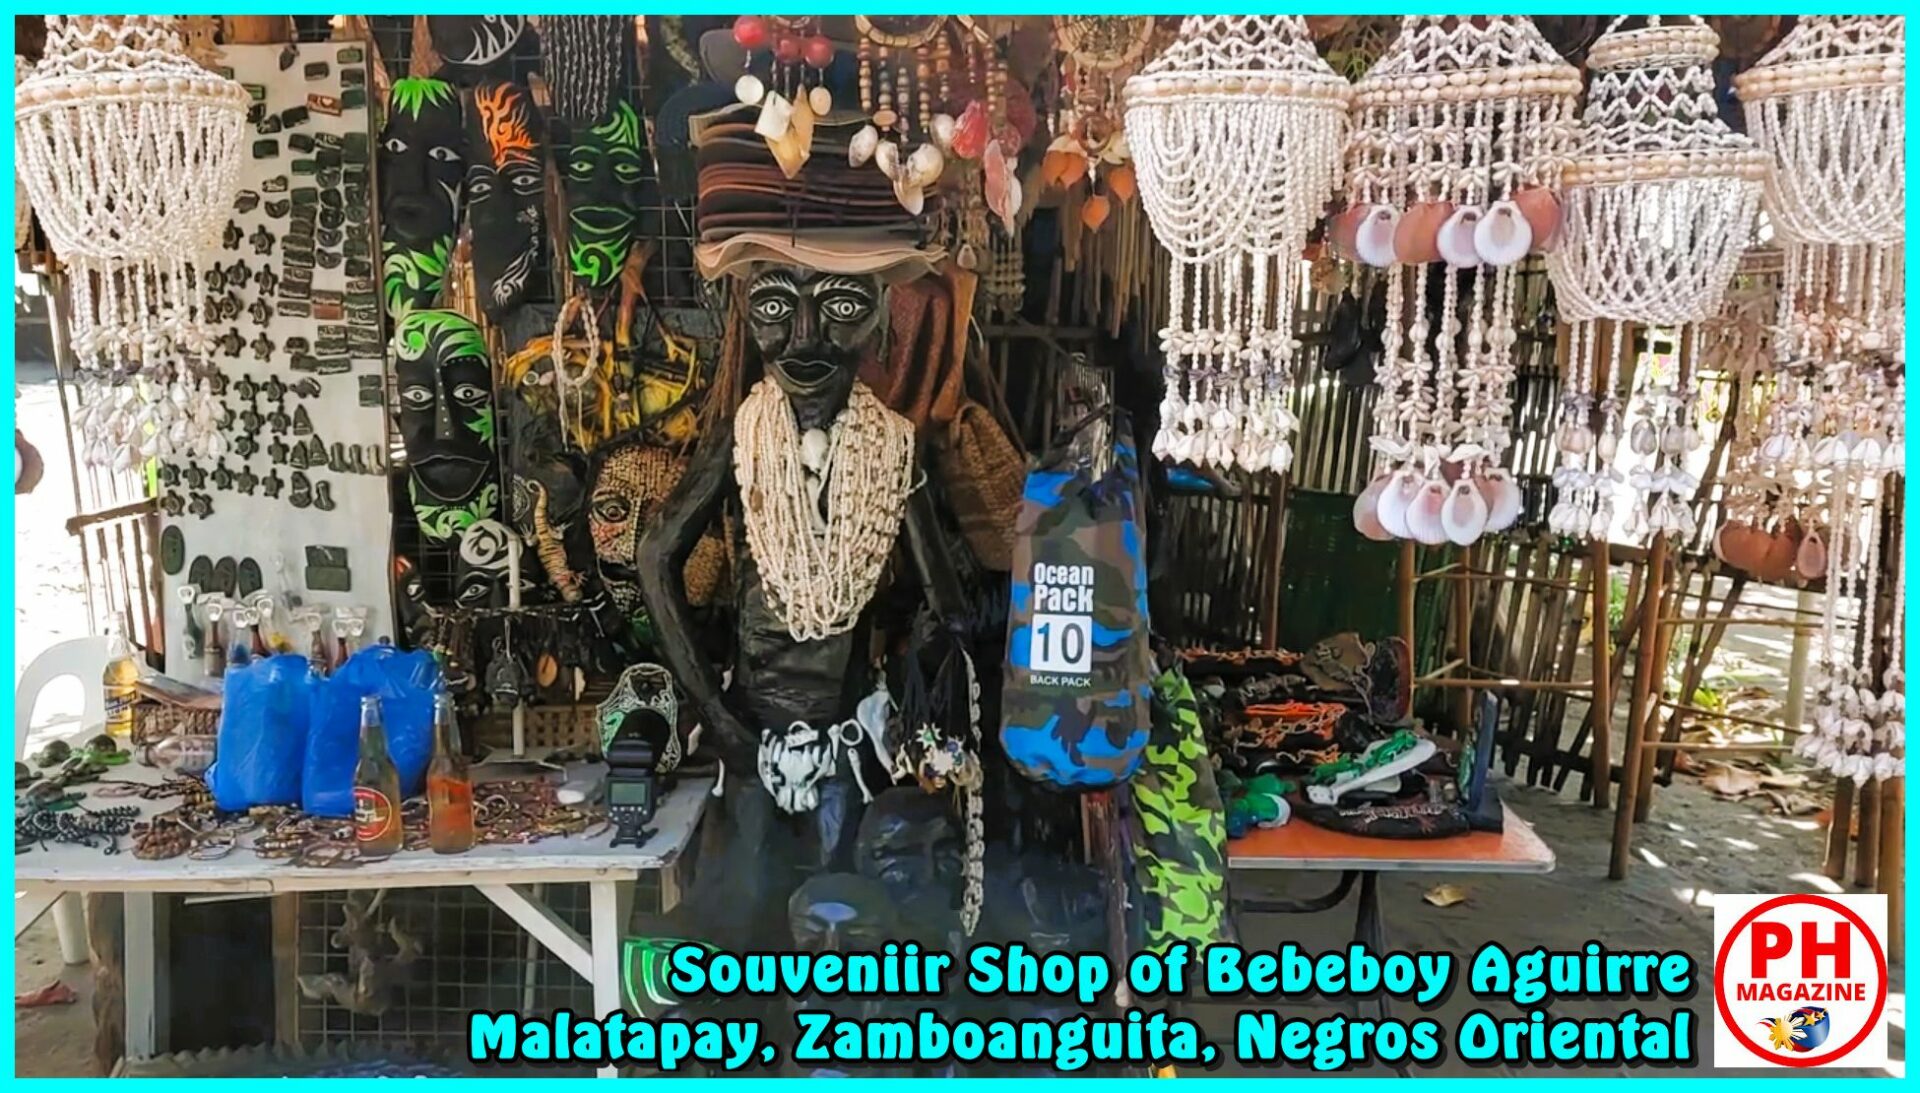 SIGHTS OF NEGROS - PHOTO OF THE DAY - Recommended souvenir shop at jetty of Malatapay, Zamboanguita